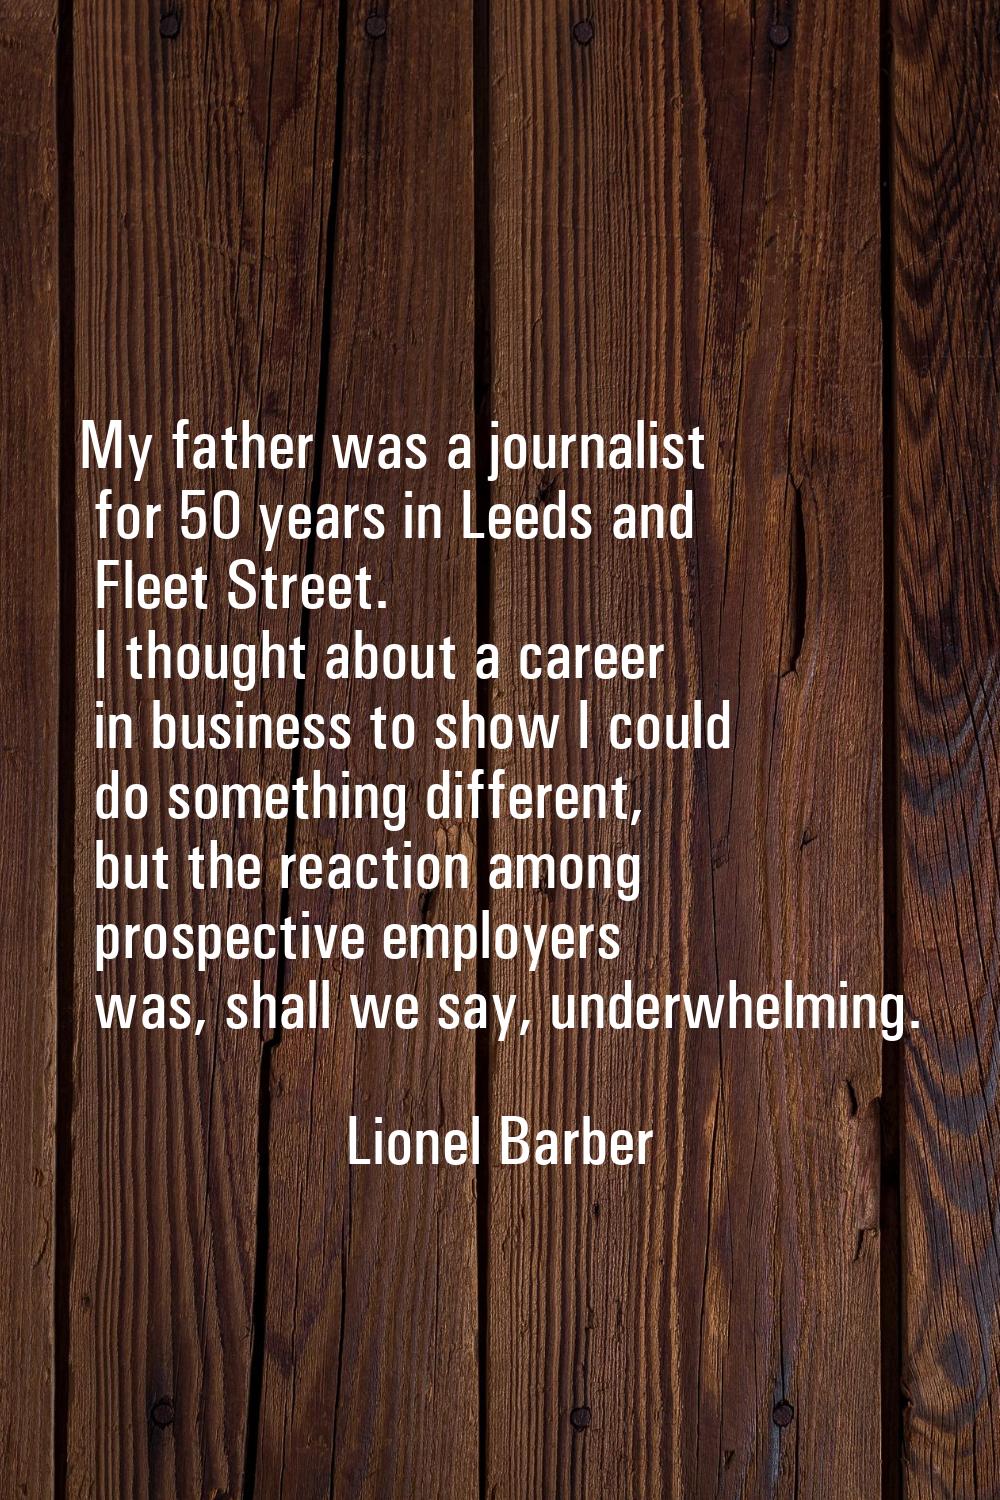 My father was a journalist for 50 years in Leeds and Fleet Street. I thought about a career in busi